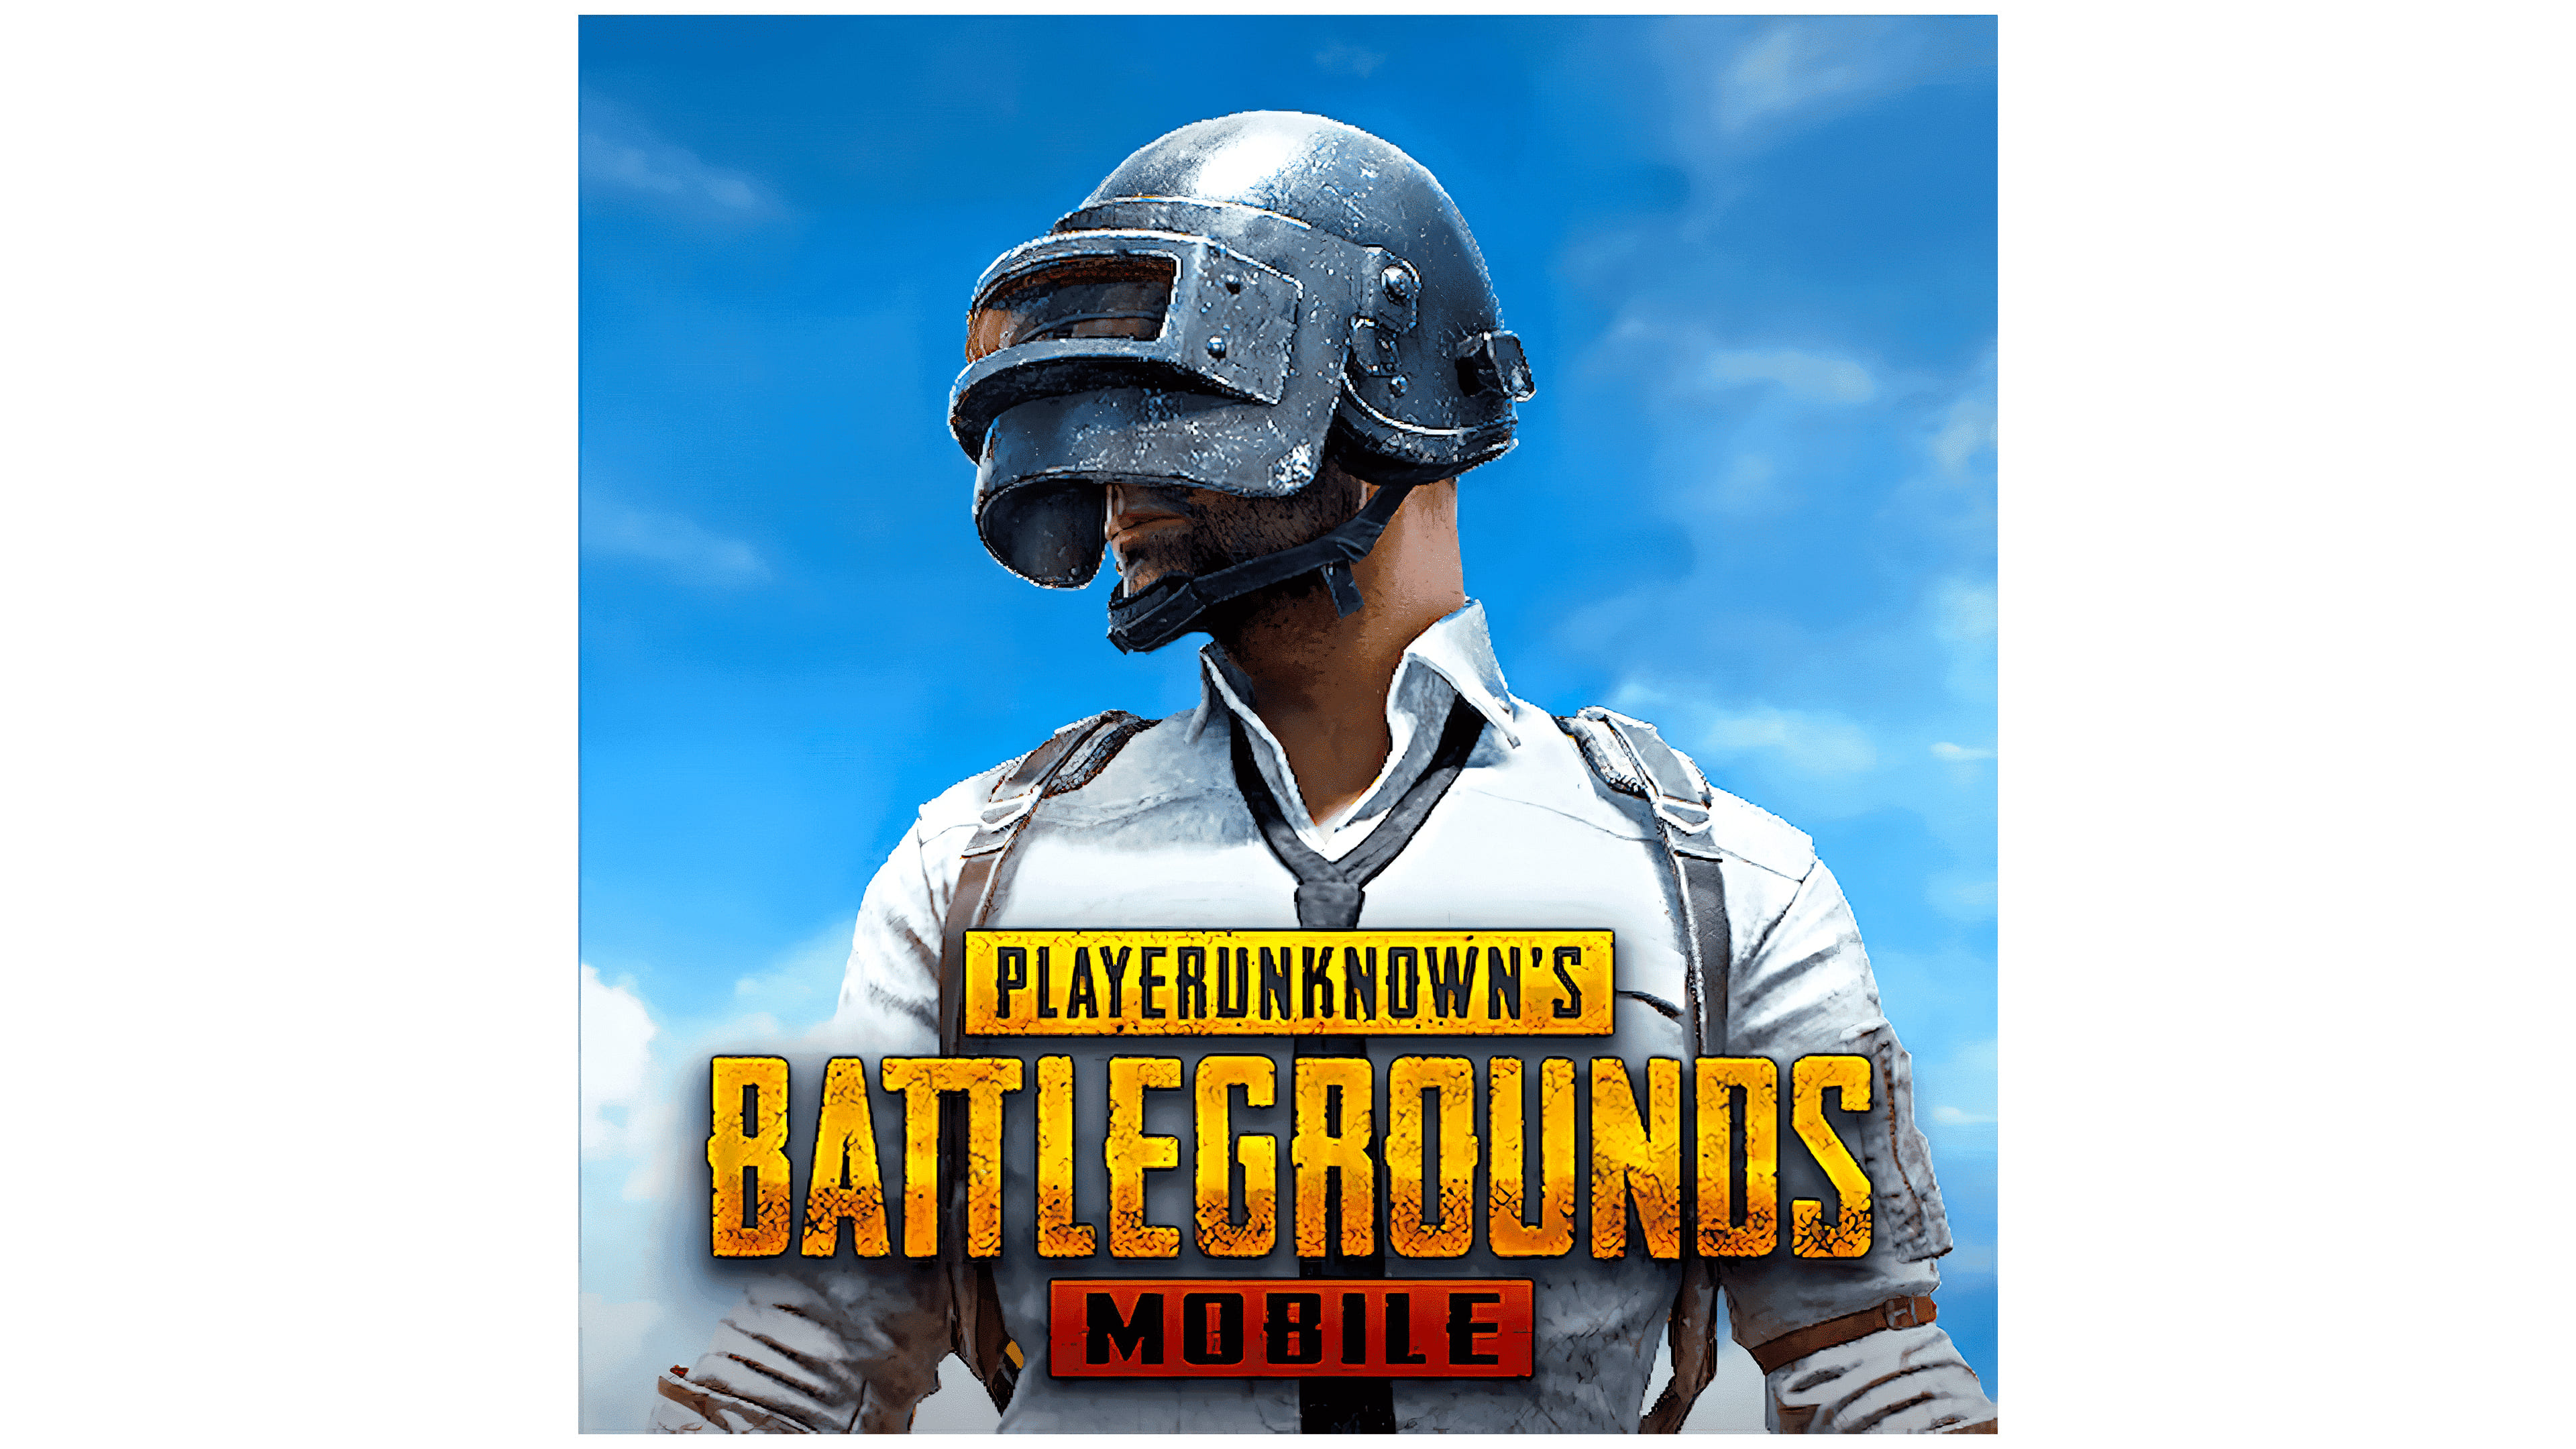 Download failed because you may not have purchased this app pubg mobile что делать фото 74